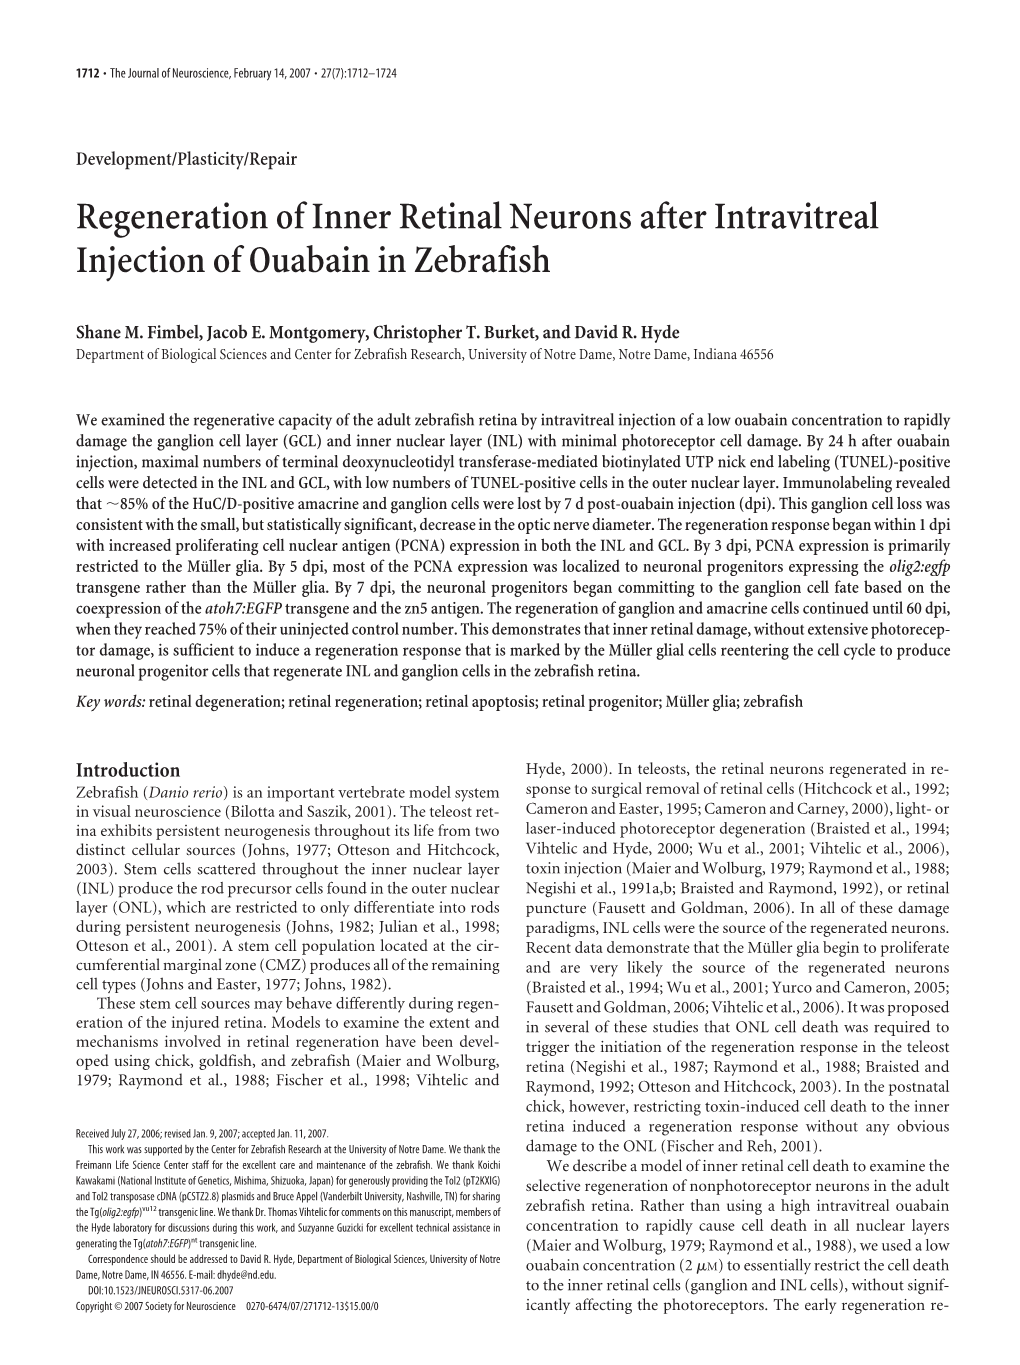 Regeneration of Inner Retinal Neurons After Intravitreal Injection of Ouabain in Zebrafish